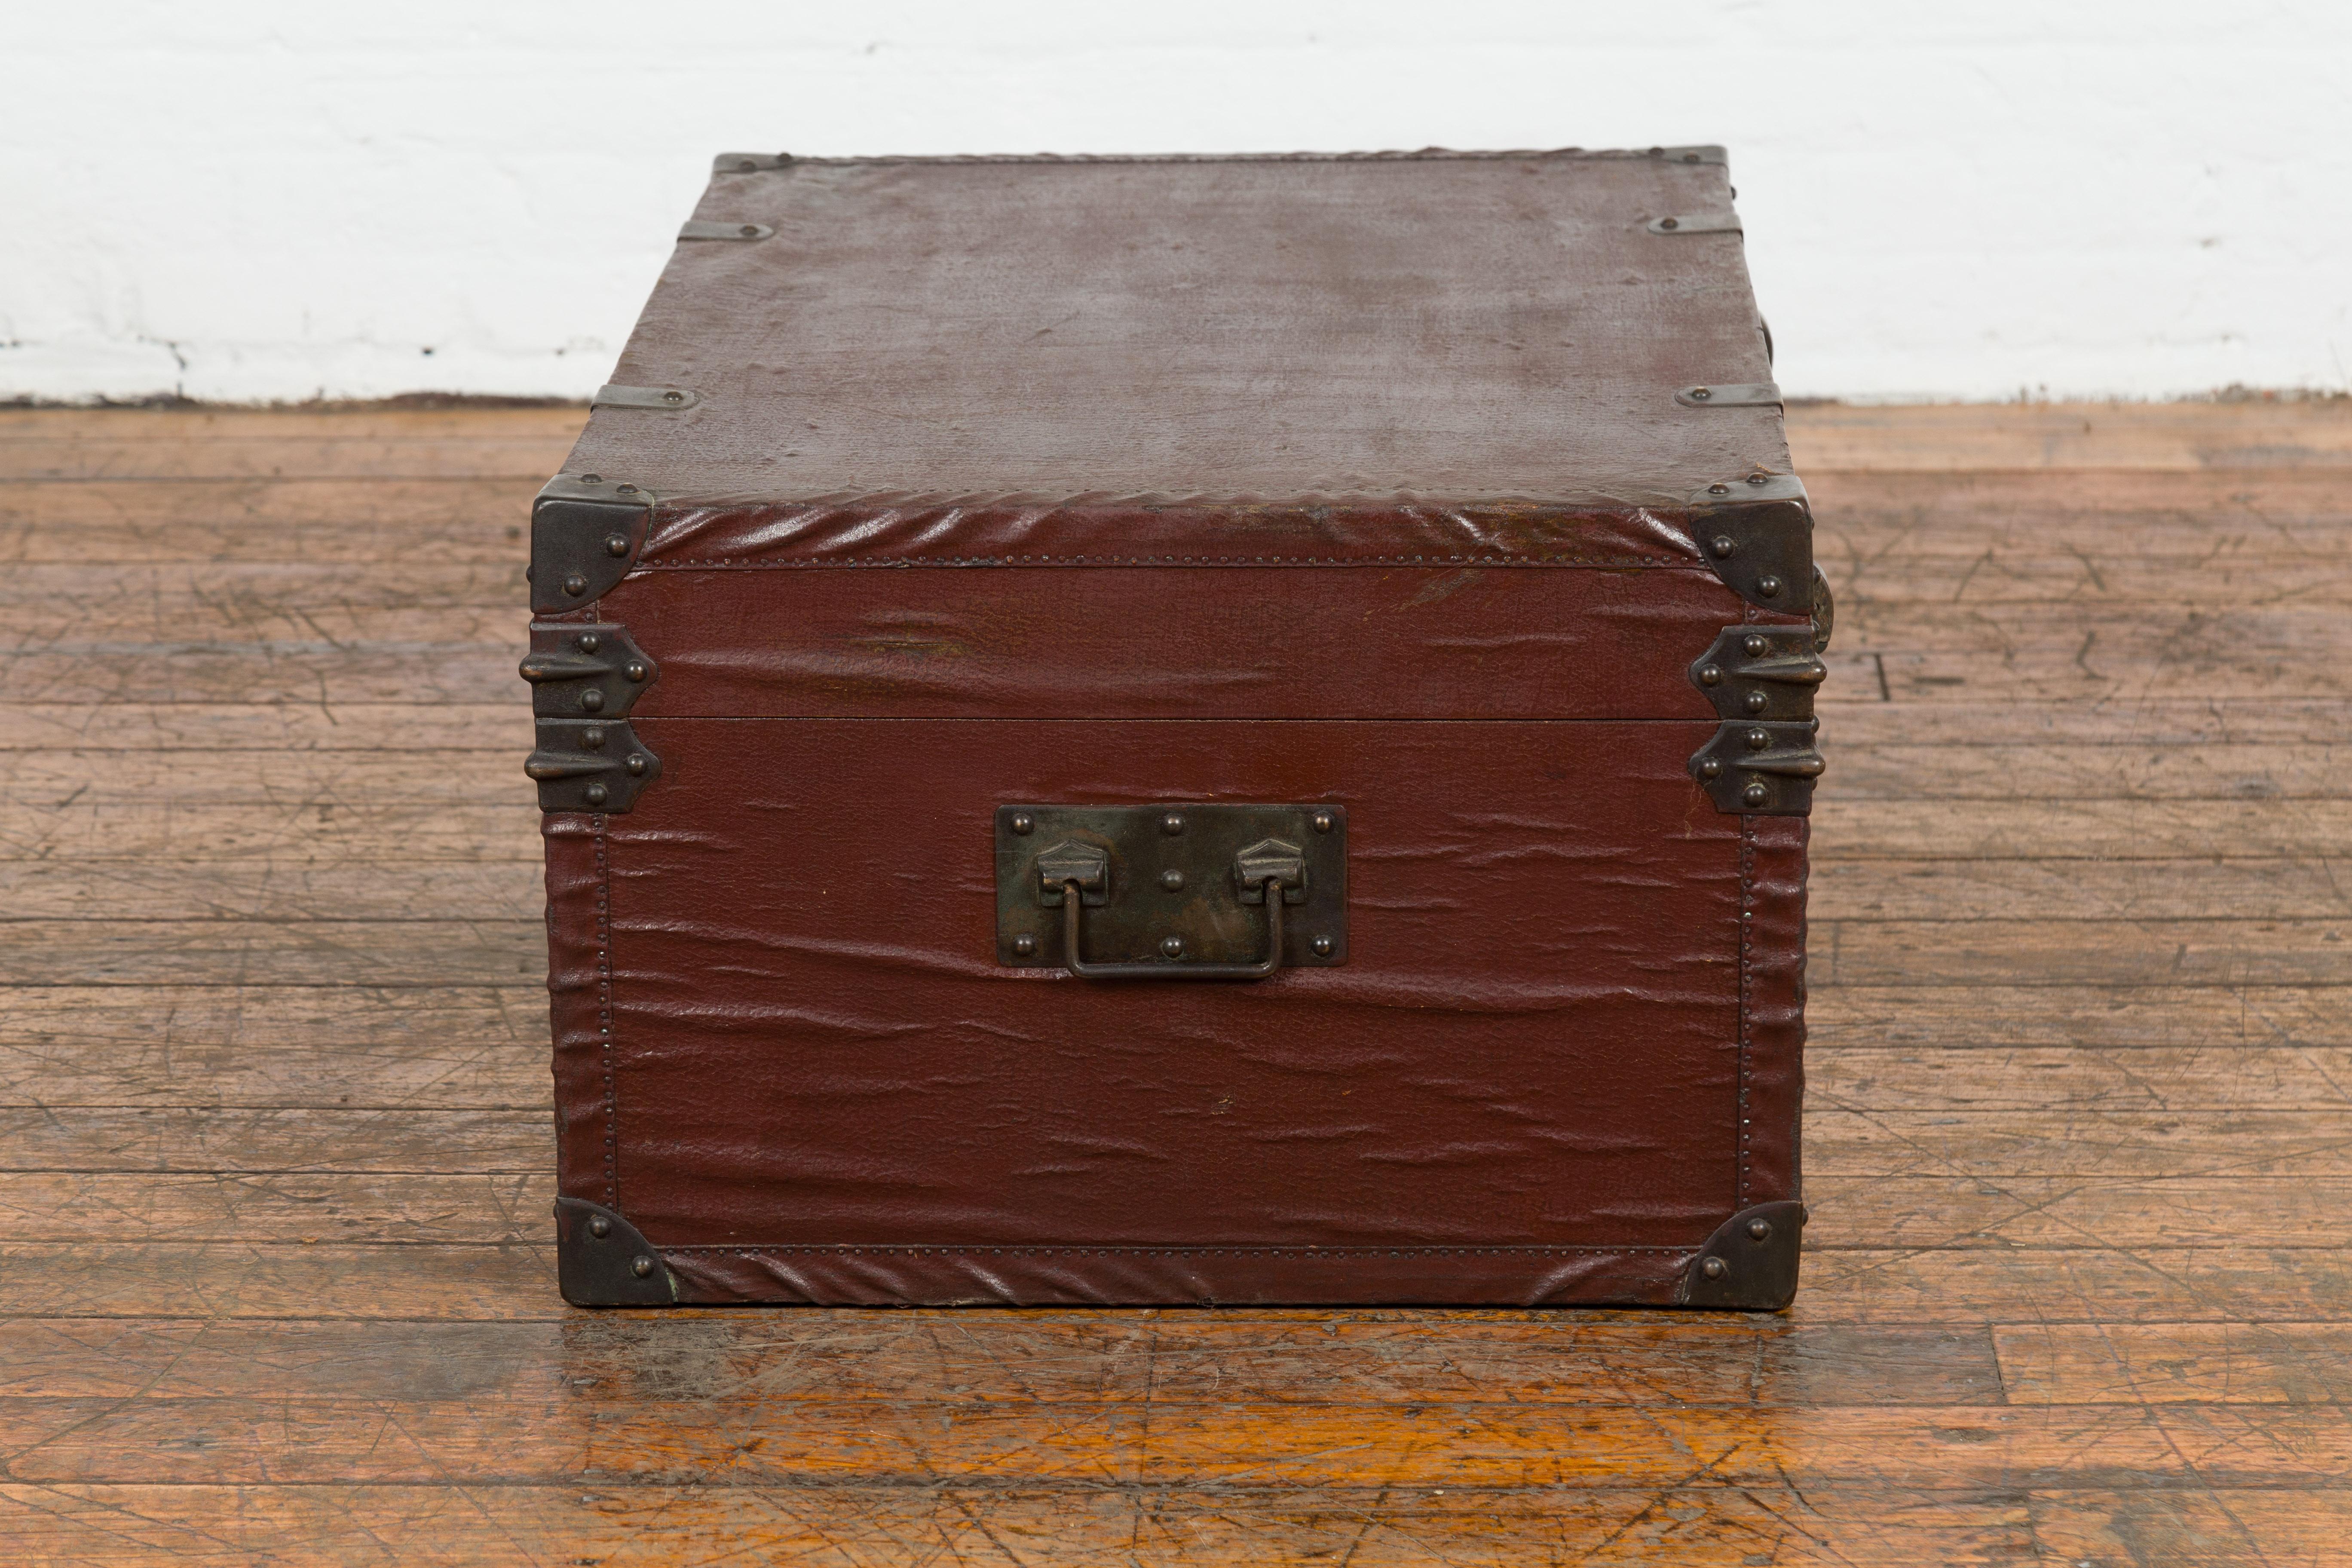 Chinese Qing Dynasty Period 19th Century Brown Leather Trunk with Brass Hardware For Sale 5